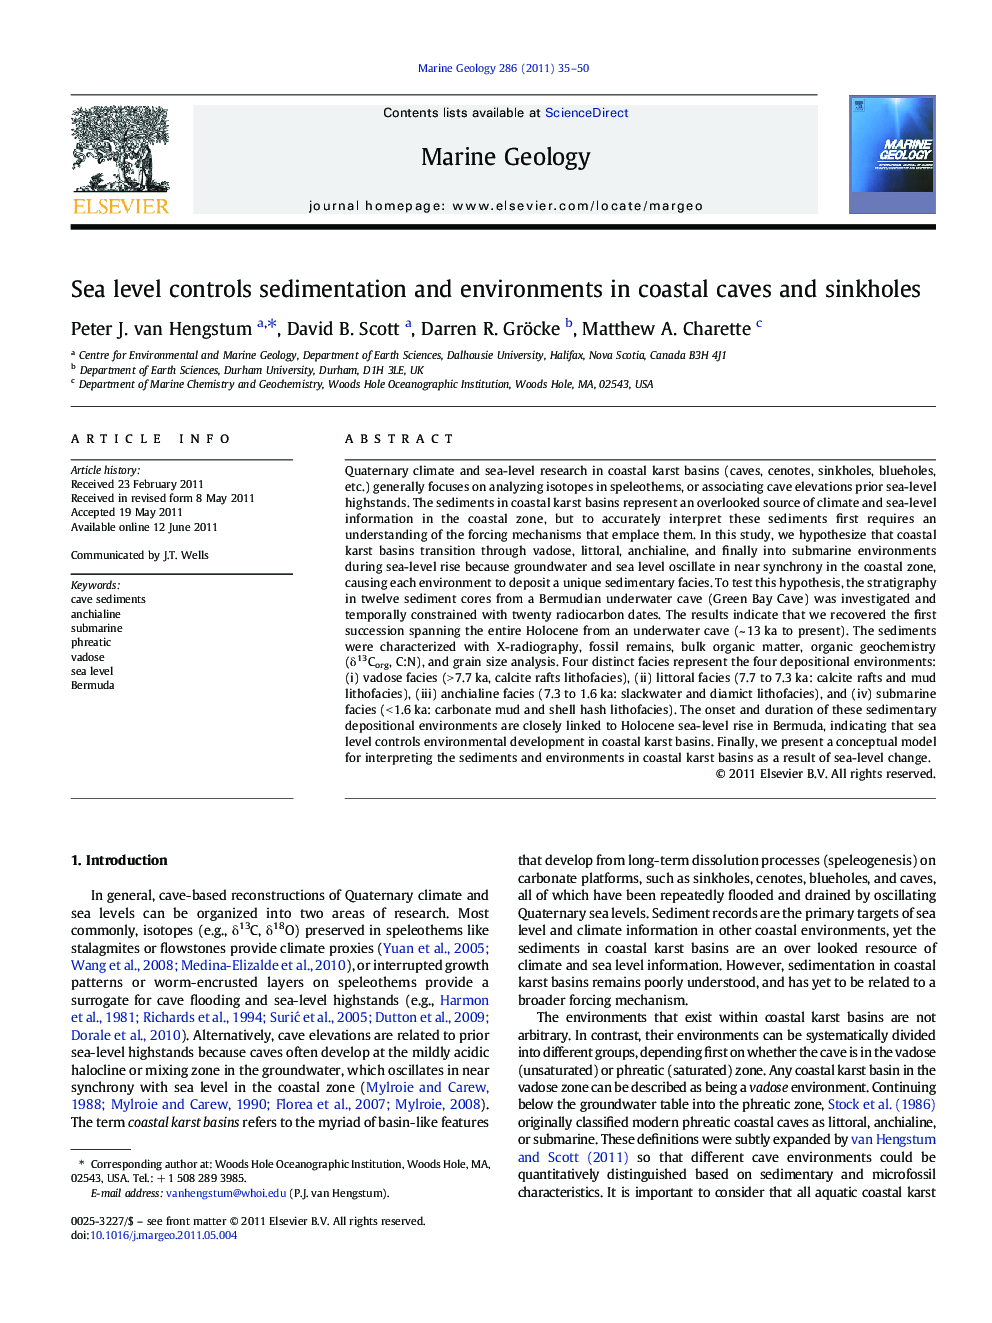 Sea level controls sedimentation and environments in coastal caves and sinkholes